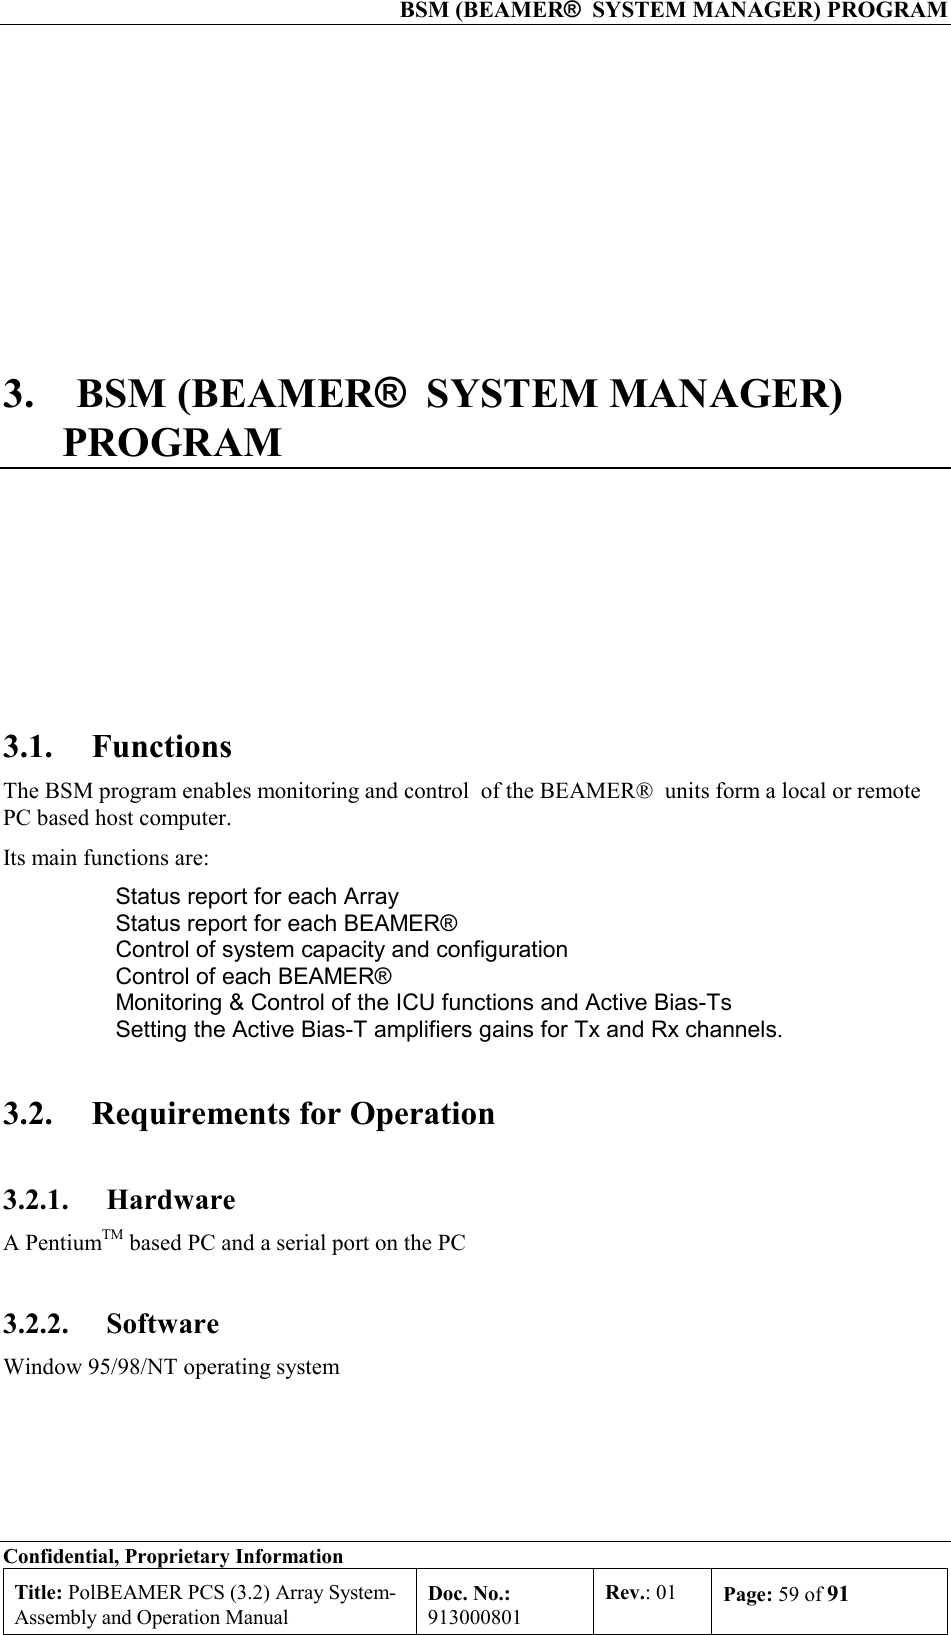  BSM (BEAMER®  SYSTEM MANAGER) PROGRAM Confidential, Proprietary Information Title: PolBEAMER PCS (3.2) Array System- Assembly and Operation Manual Doc. No.: 913000801 Rev.: 01  Page: 59 of 91  3. BSM (BEAMER®  SYSTEM MANAGER) PROGRAM  3.1. Functions The BSM program enables monitoring and control  of the BEAMER®  units form a local or remote PC based host computer. Its main functions are:   Status report for each Array   Status report for each BEAMER®    Control of system capacity and configuration   Control of each BEAMER®    Monitoring &amp; Control of the ICU functions and Active Bias-Ts   Setting the Active Bias-T amplifiers gains for Tx and Rx channels. 3.2.  Requirements for Operation 3.2.1. Hardware A PentiumTM based PC and a serial port on the PC 3.2.2. Software Window 95/98/NT operating system 